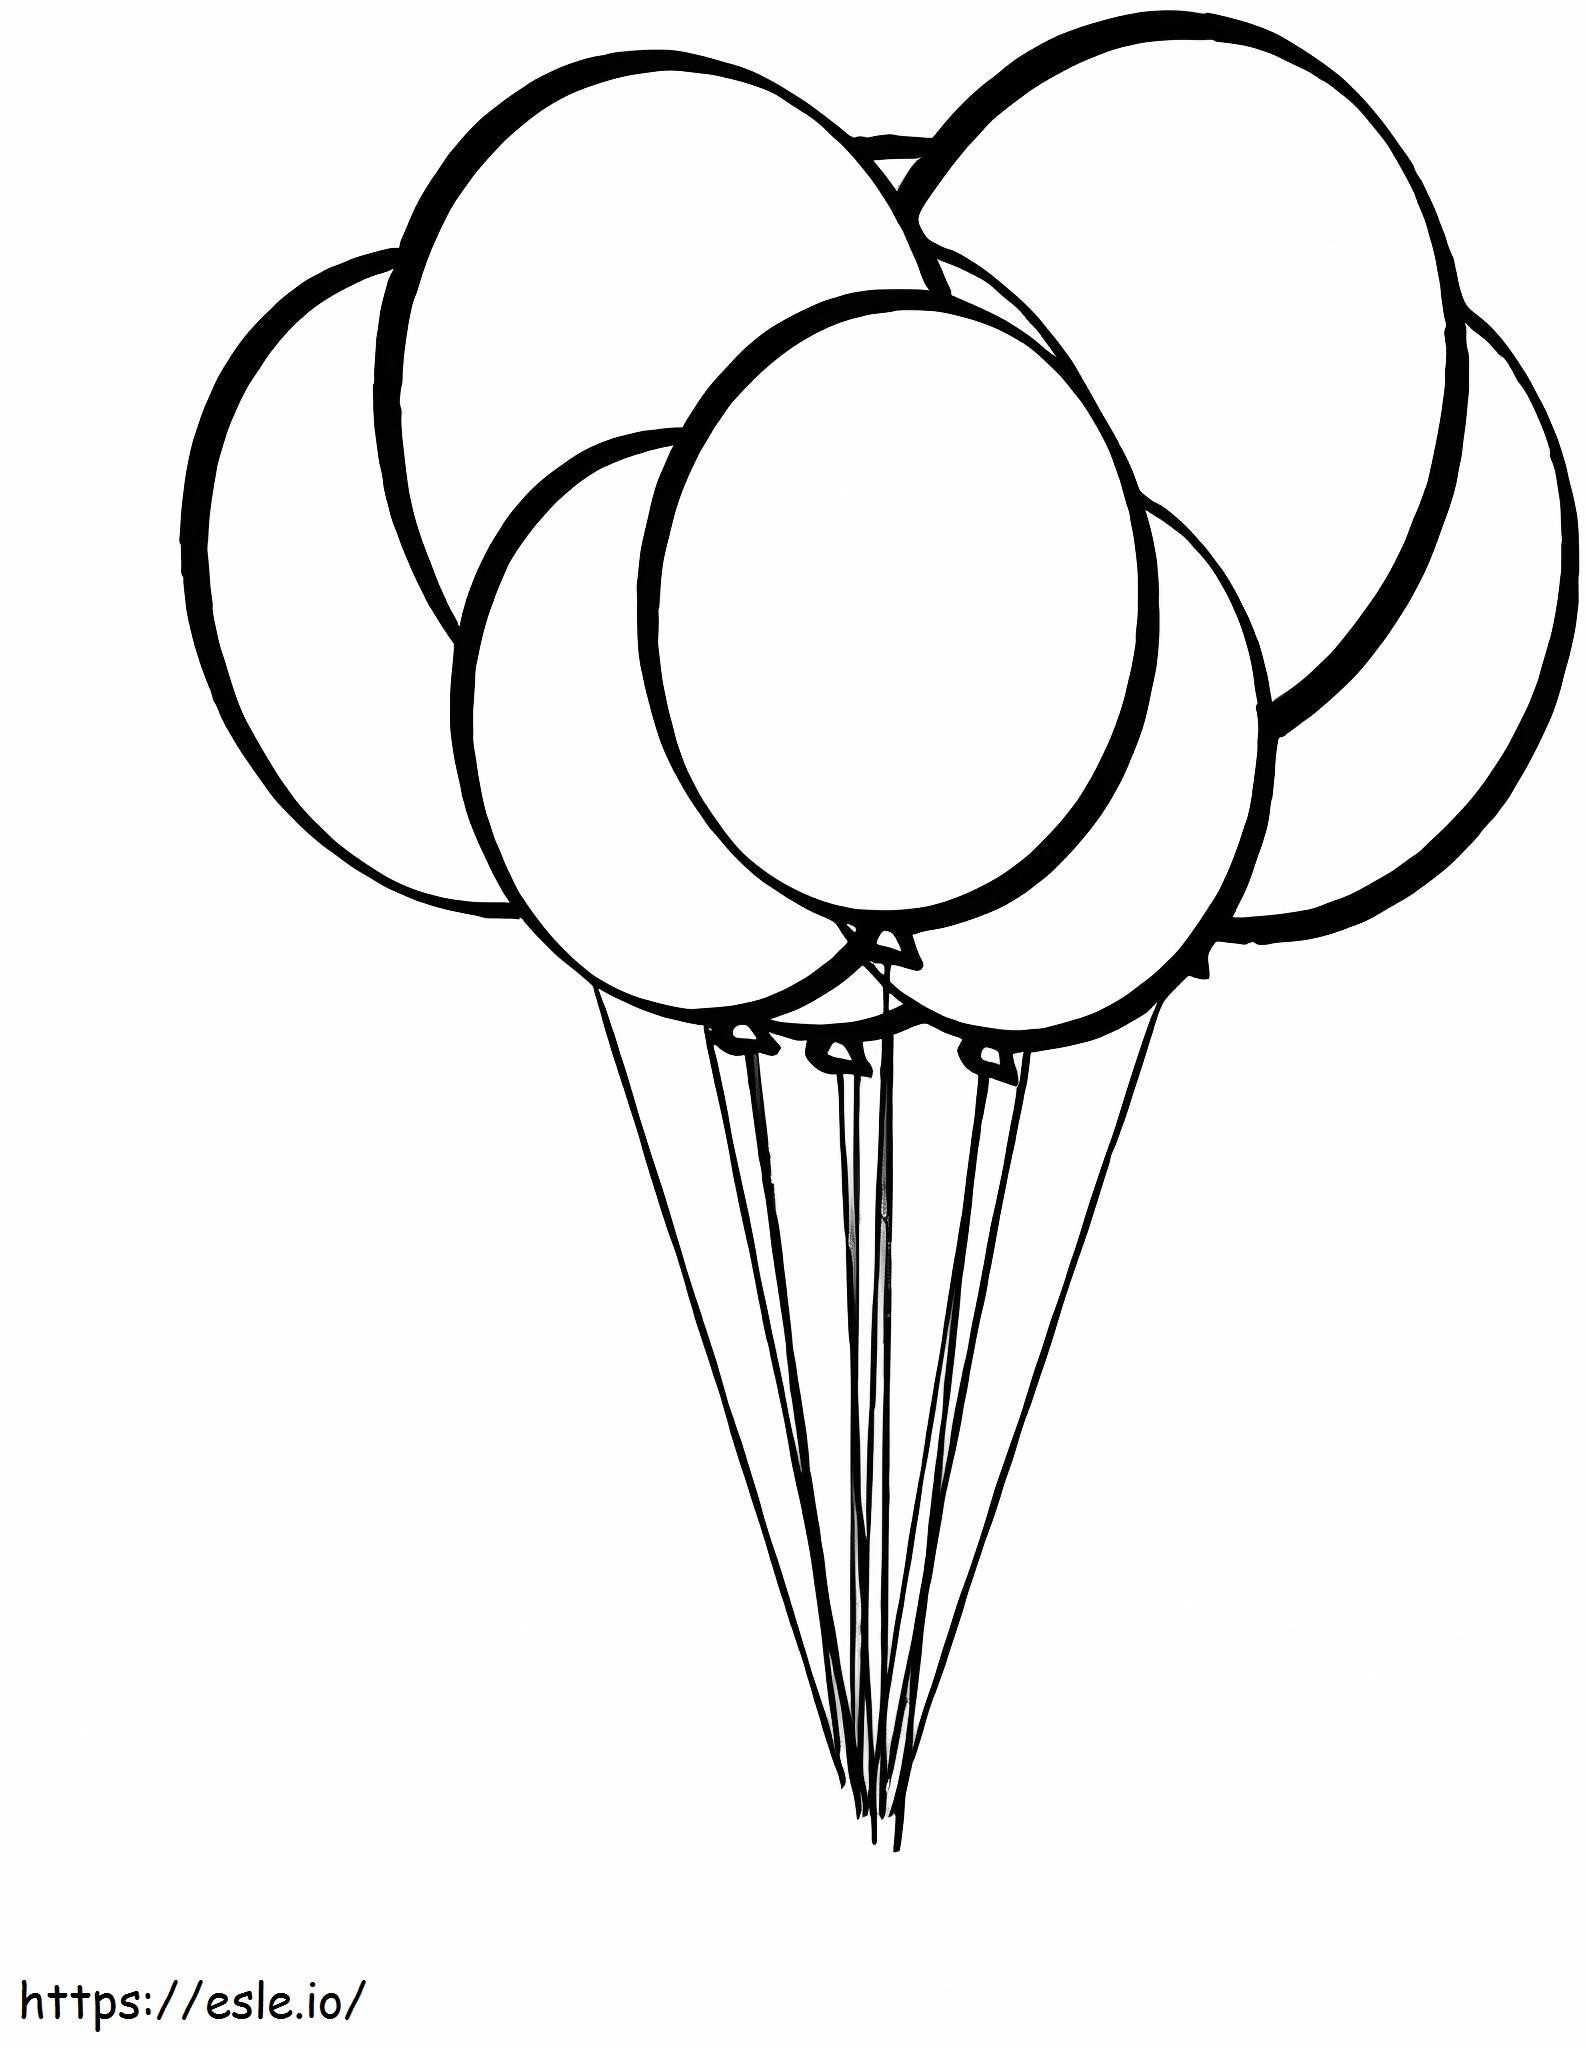 Awesome Balloon coloring page